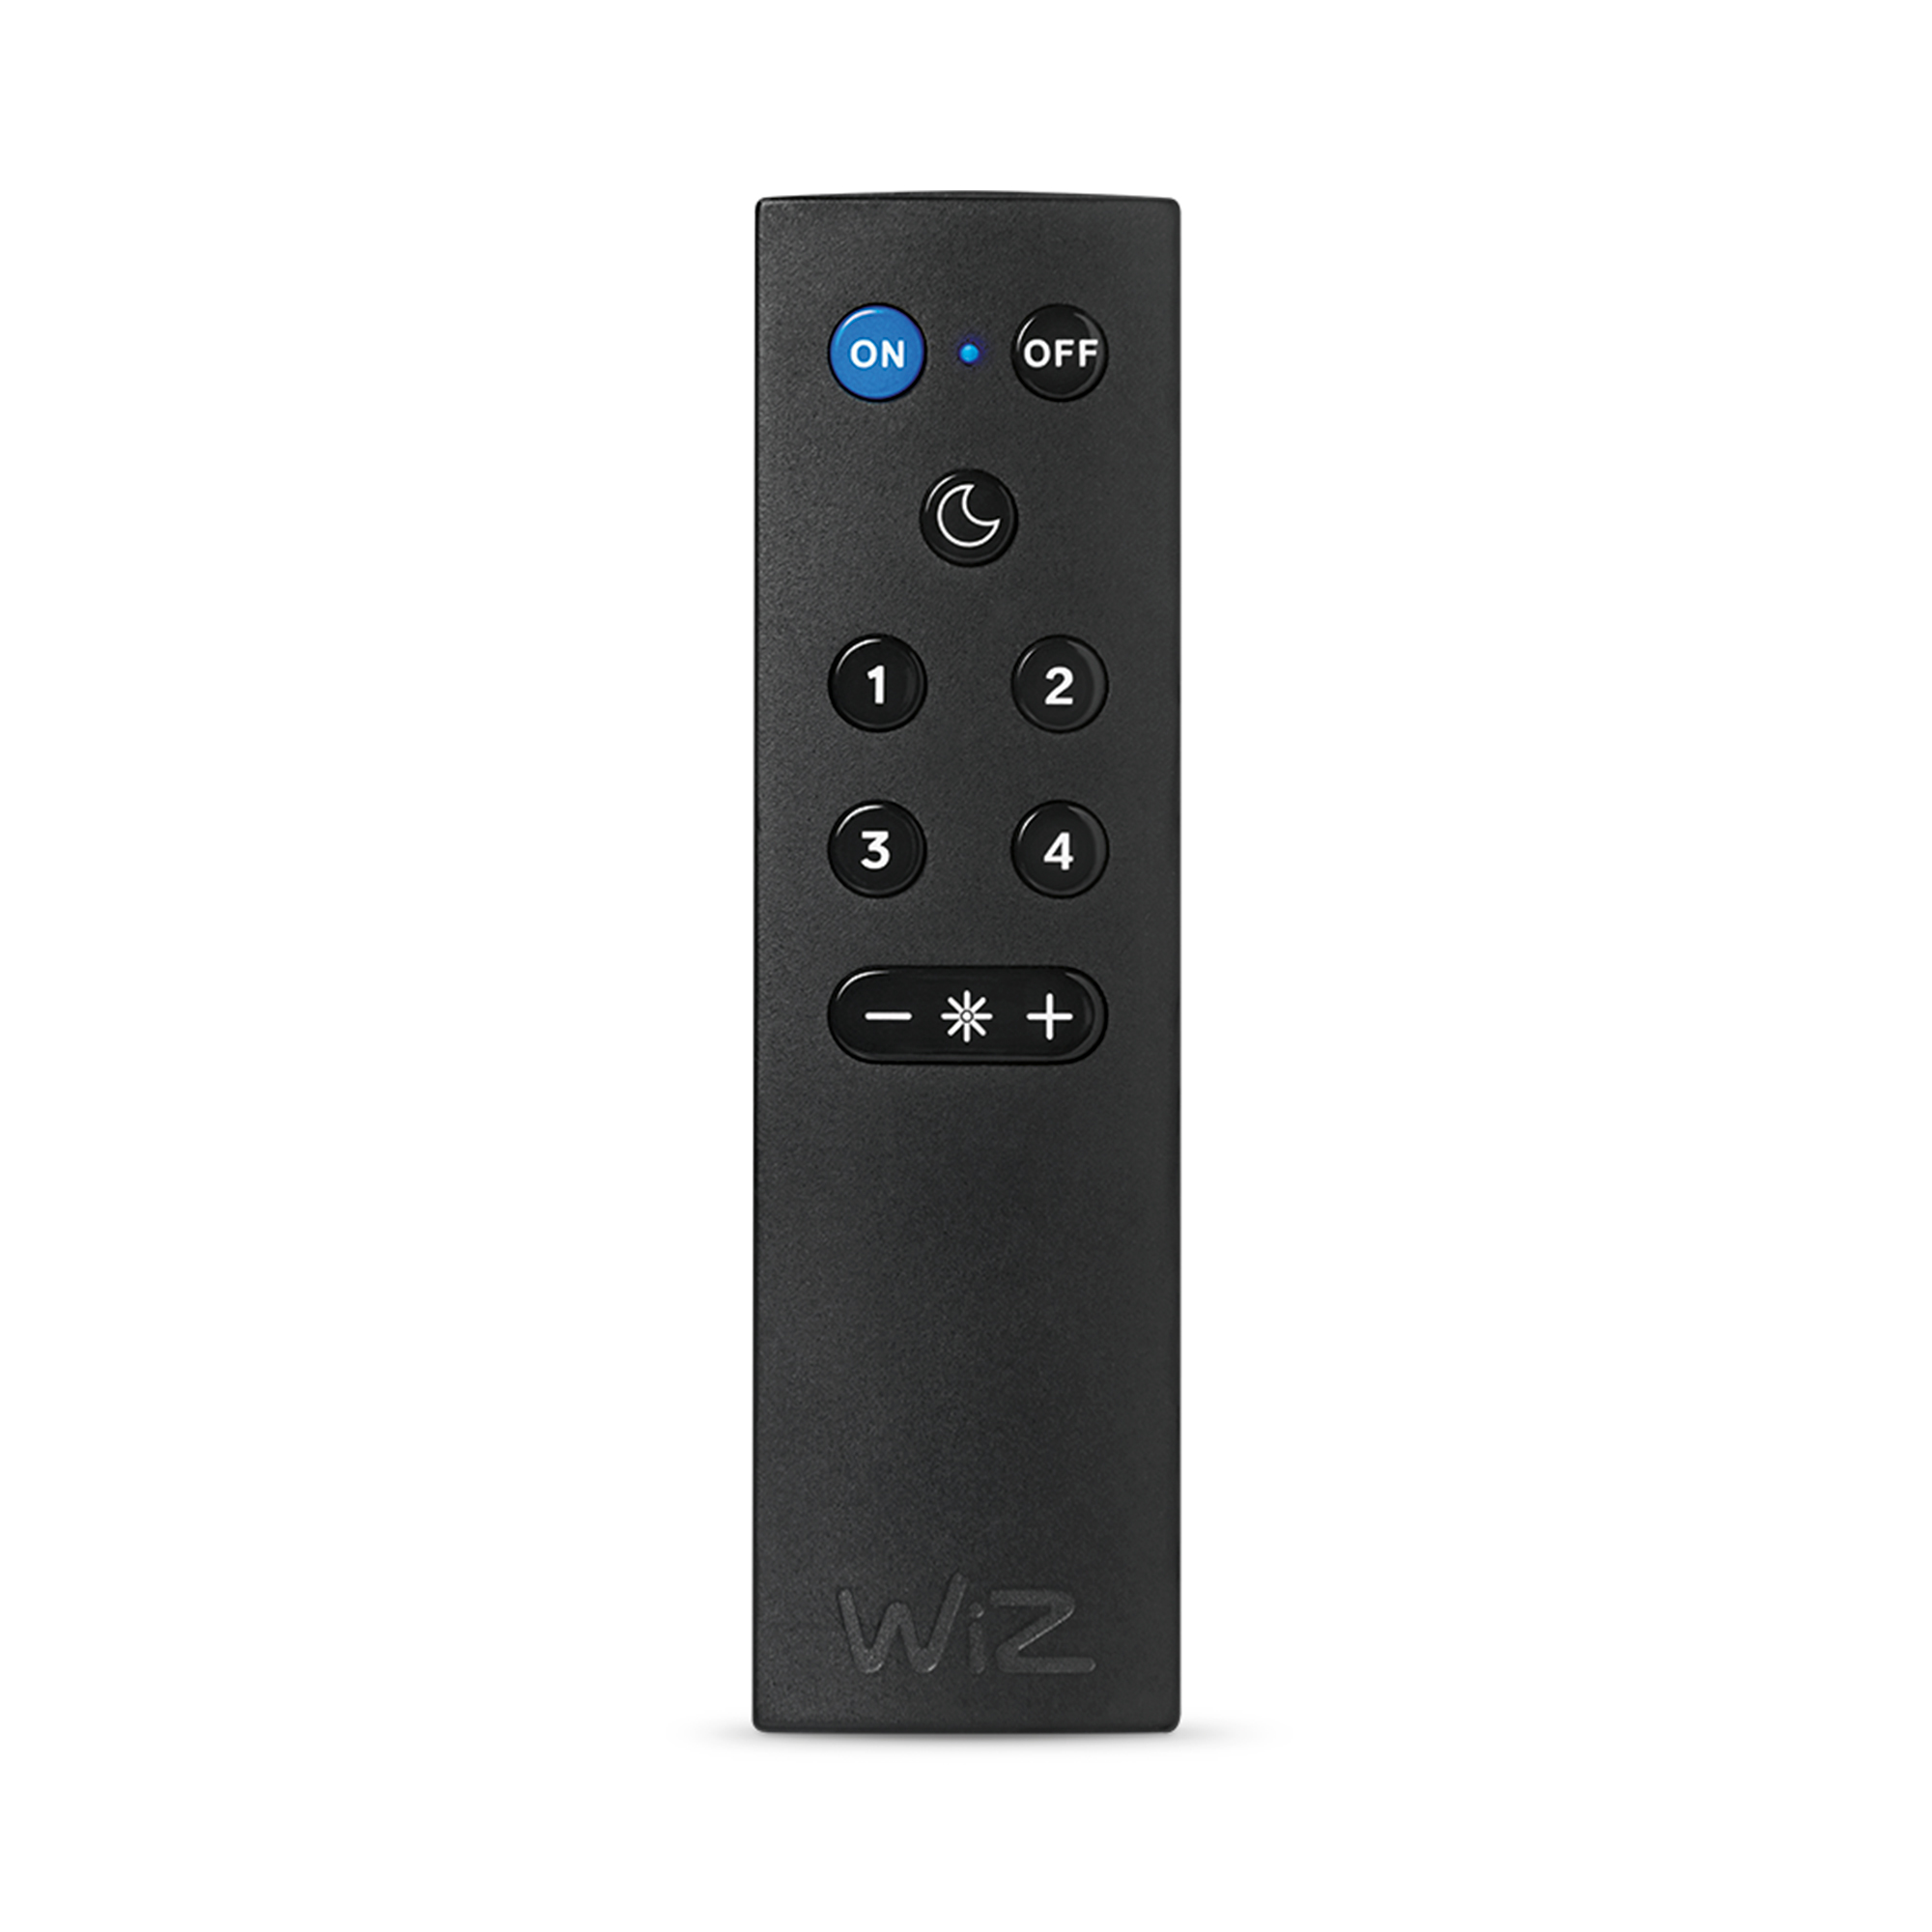 Wiz Remote Control with batteries